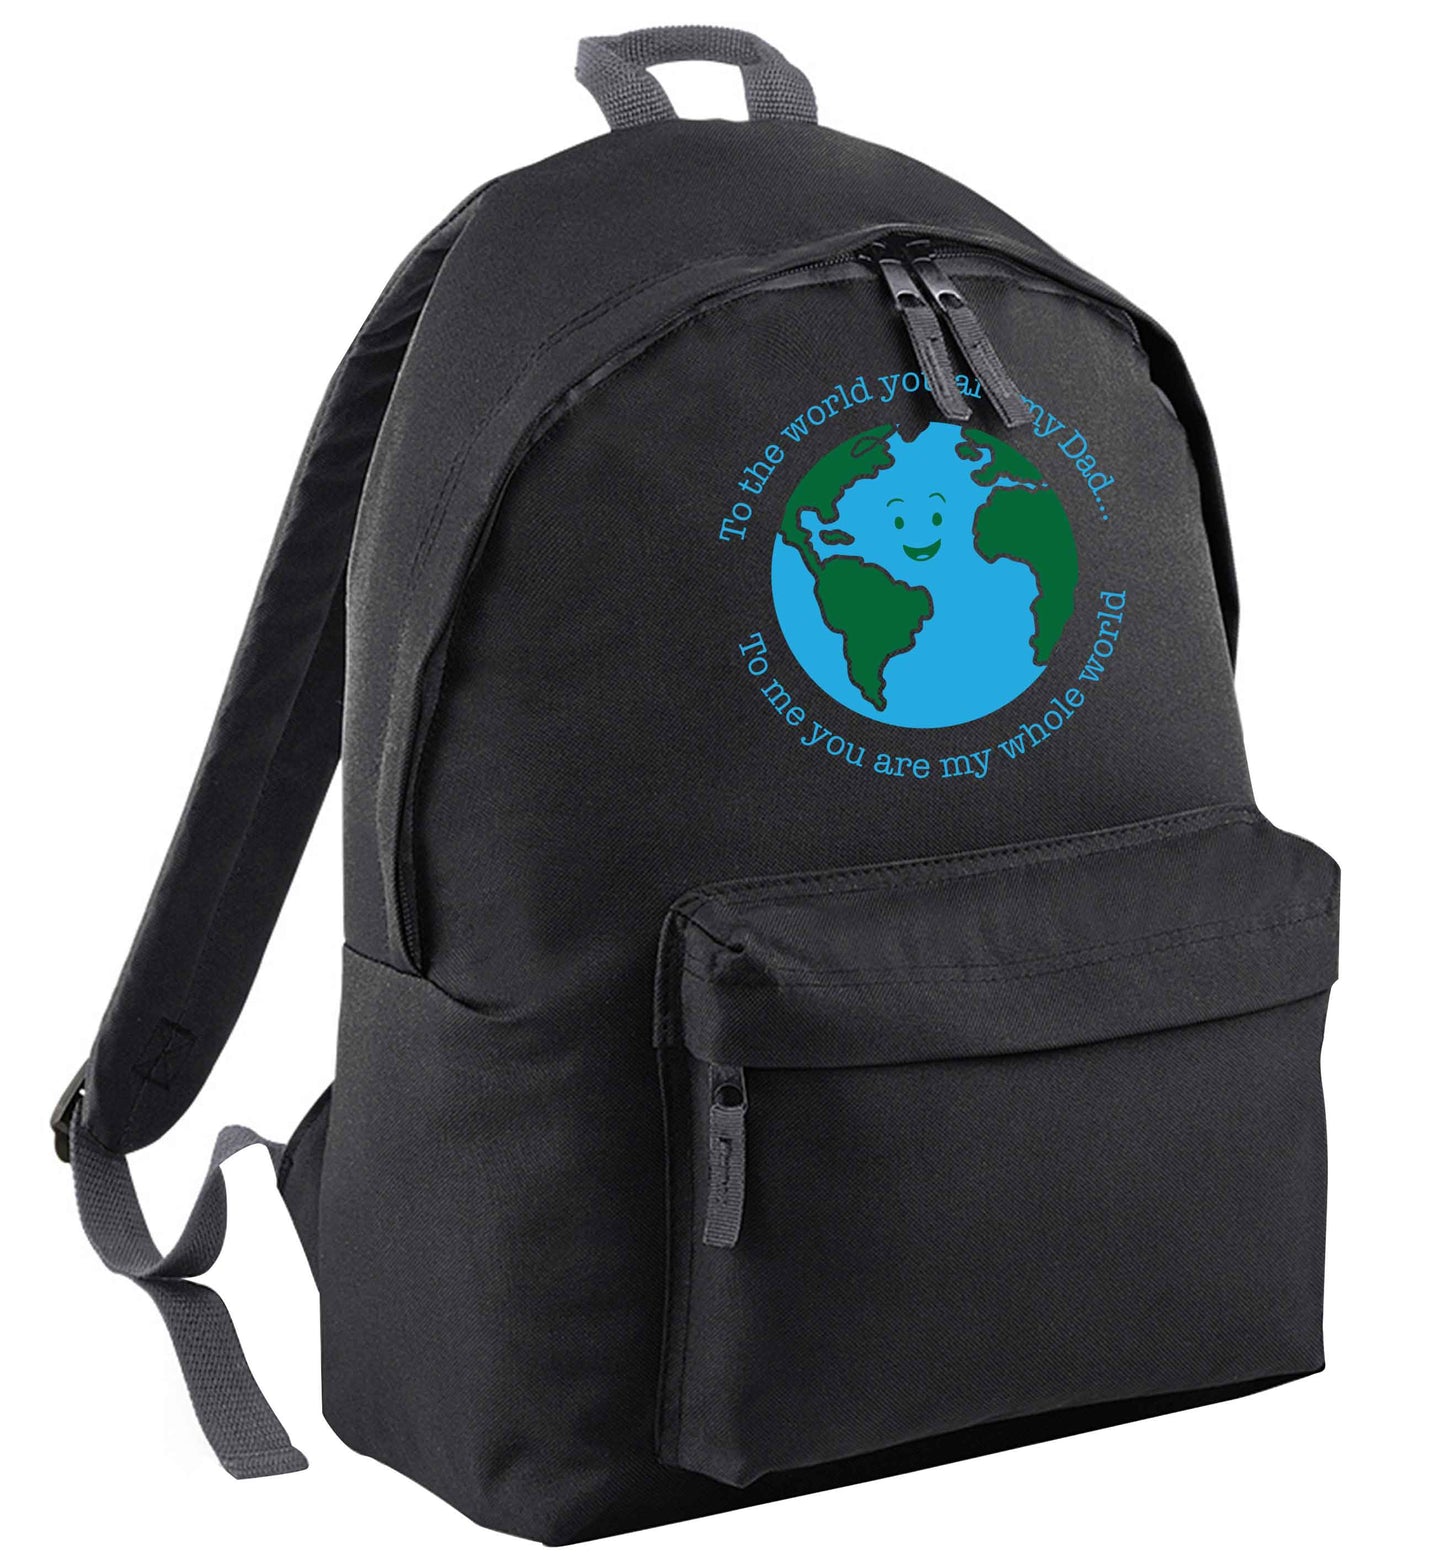 To the world you are my dad, to me you are my whole world black adults backpack